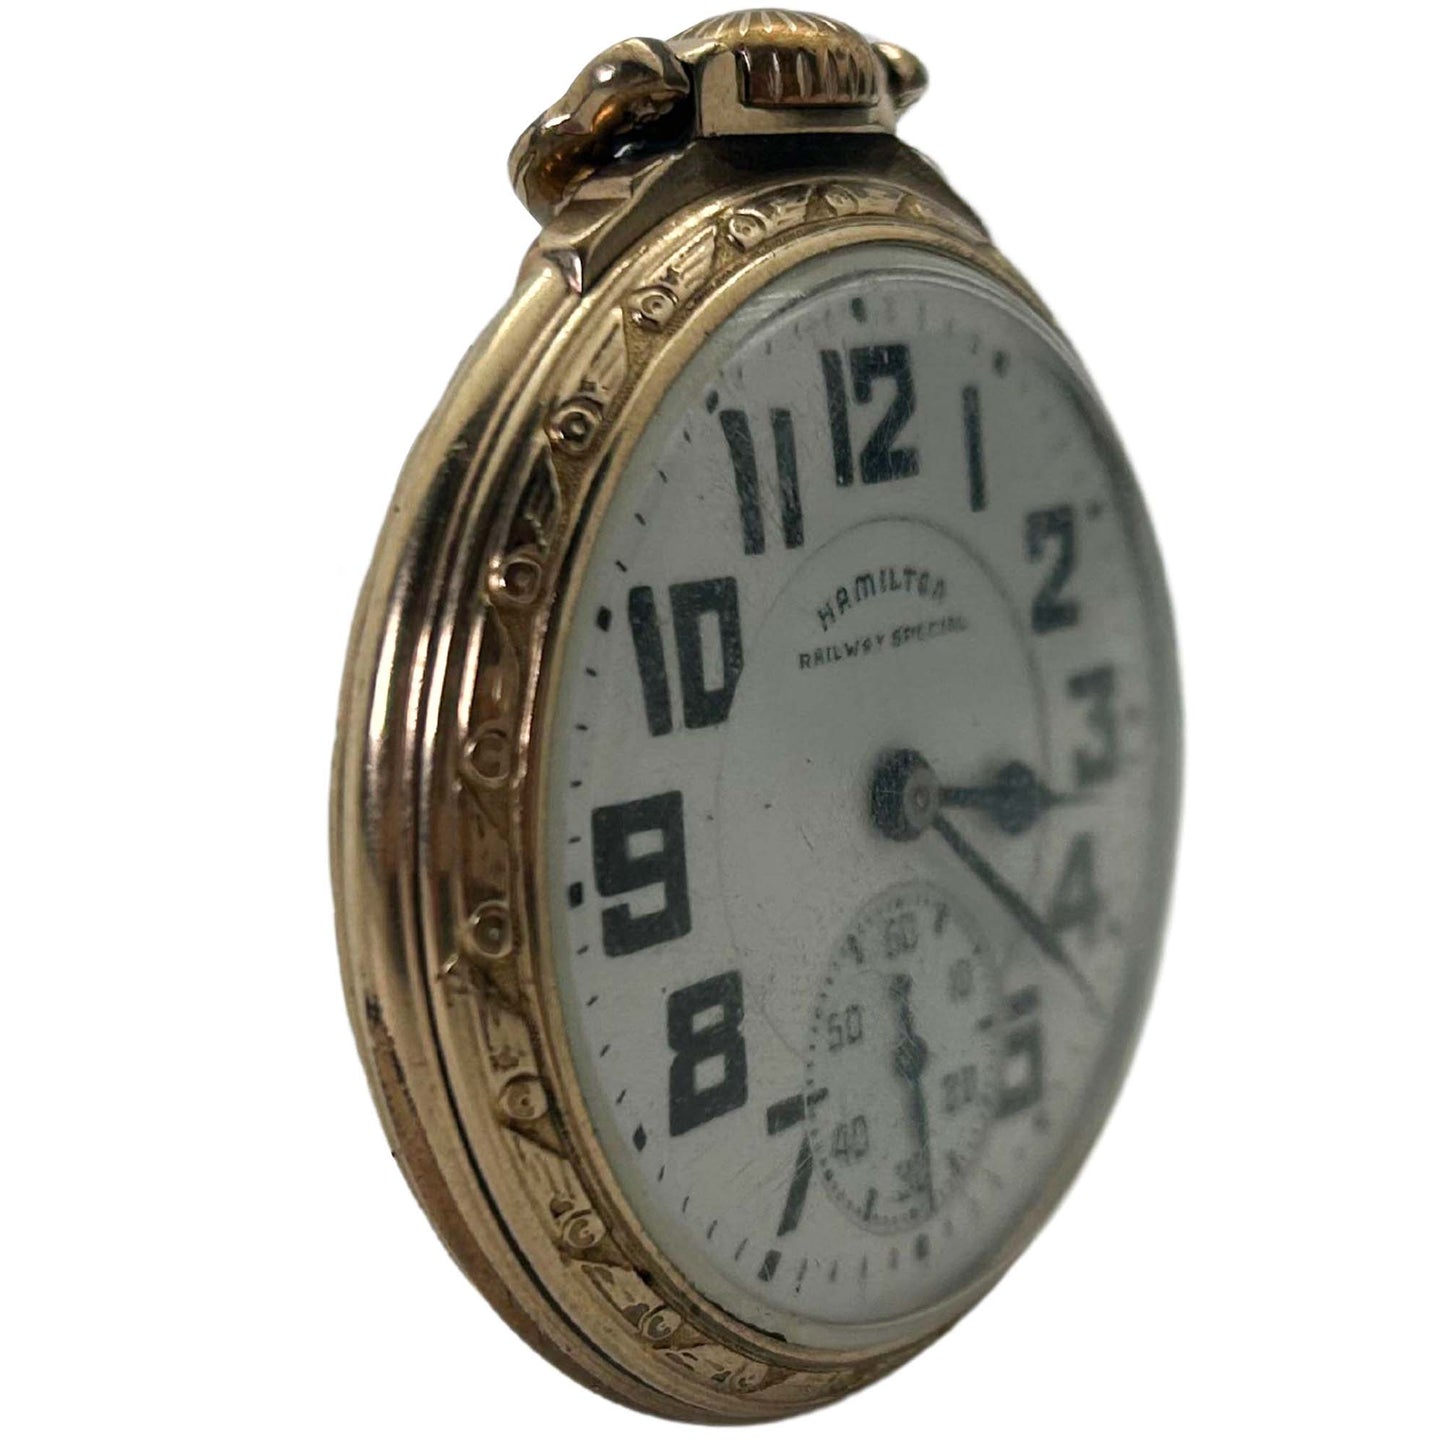 Hamilton Railway Special Gold Filled Pocket Watch Side